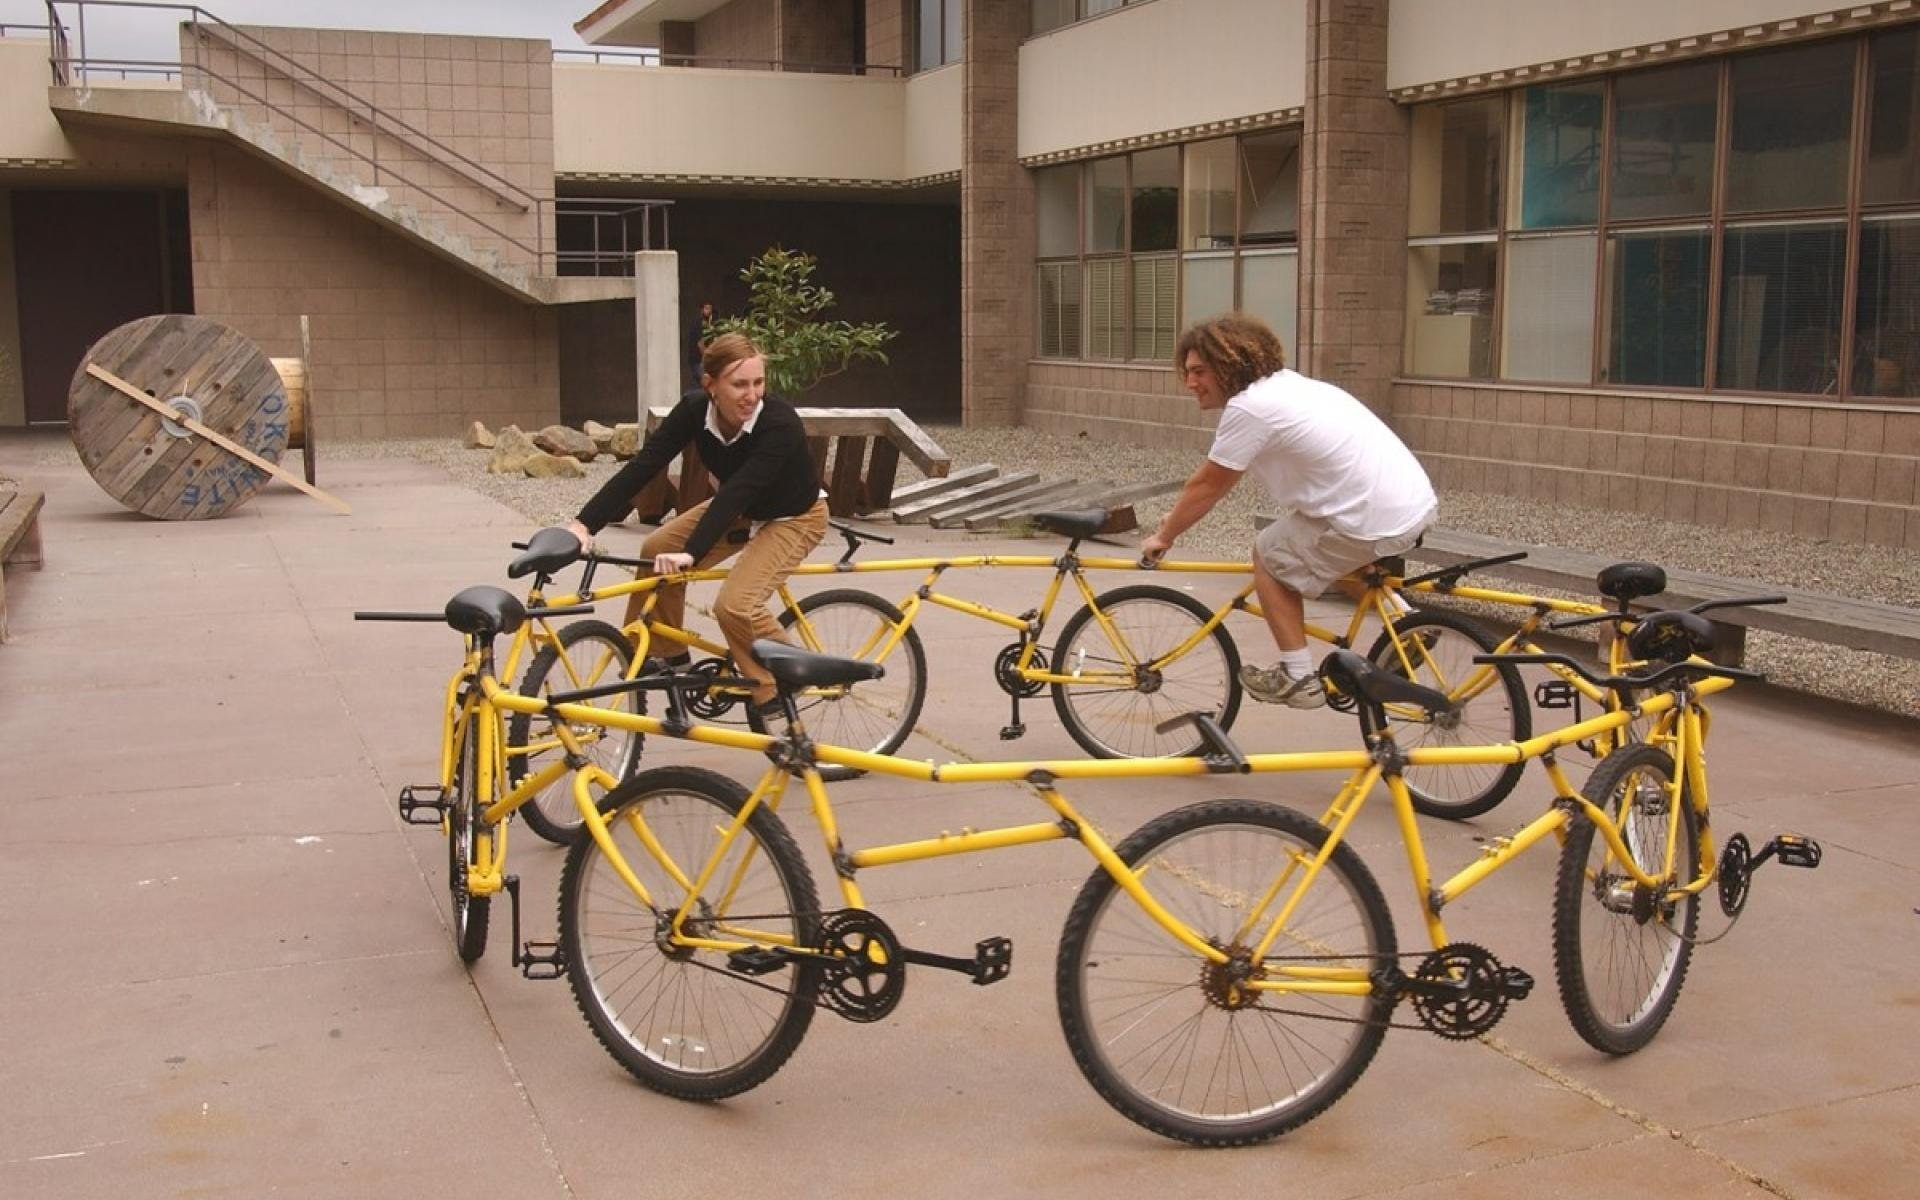 funny, humor, transportation, bicycle, architecture, building exterior